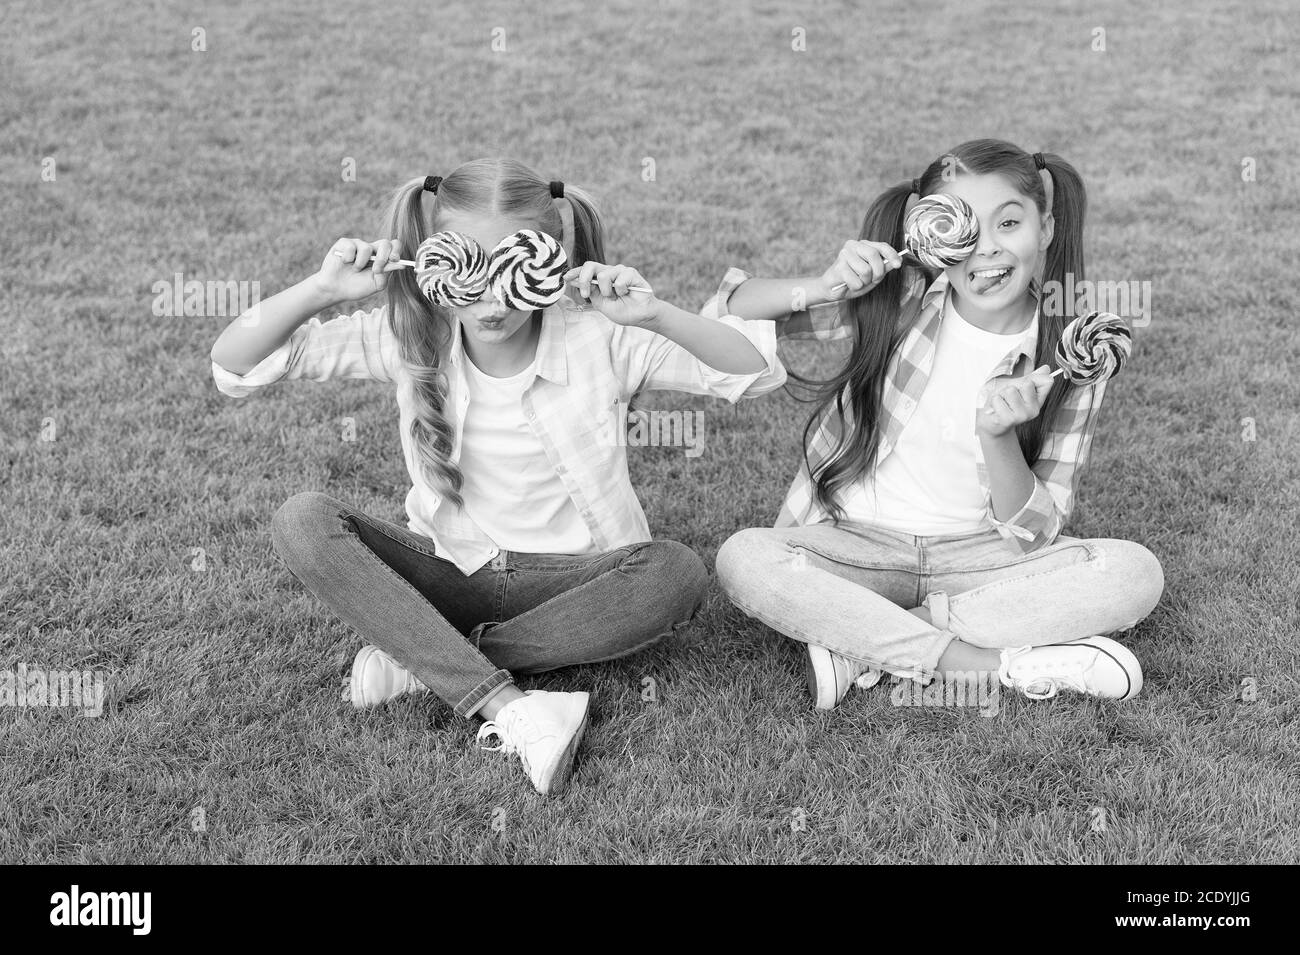 Holiday food. Sweet childhood. Happy children hold candy sit green grass. Candy shop. Lollipop treats. Candy synonym for happiness. Sugar and calories. Joyful cheerful friends eating sweets outdoors. Stock Photo